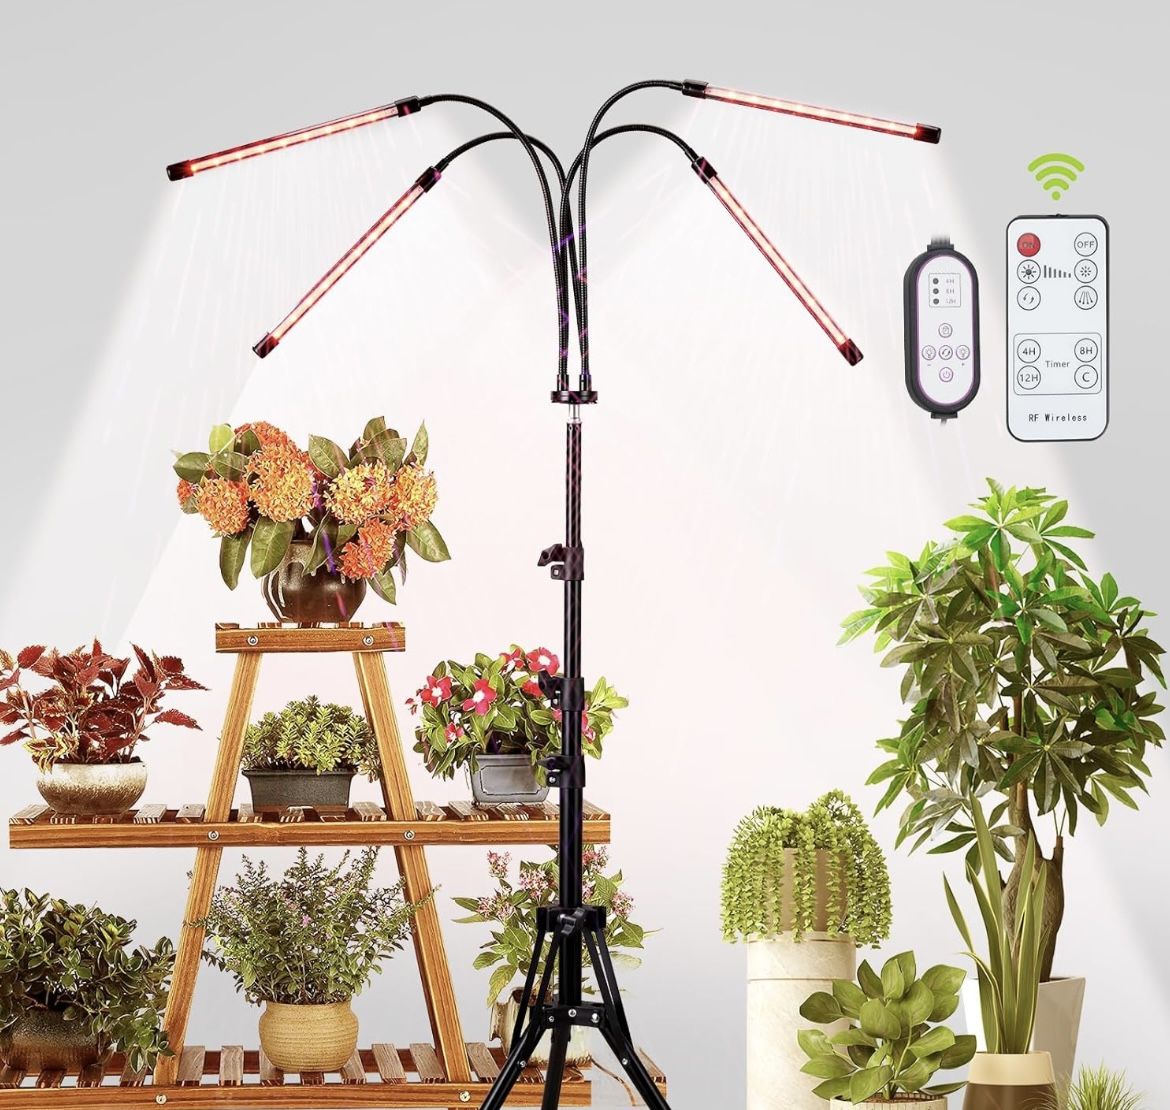 WTINTELL LED Grow Lights for Indoor Plants,LED Plant Grow Light with Stand,Led Full Spectrum,10 Dimmable Levels,3 Modes Timing,Tripod Adjustable 15-72